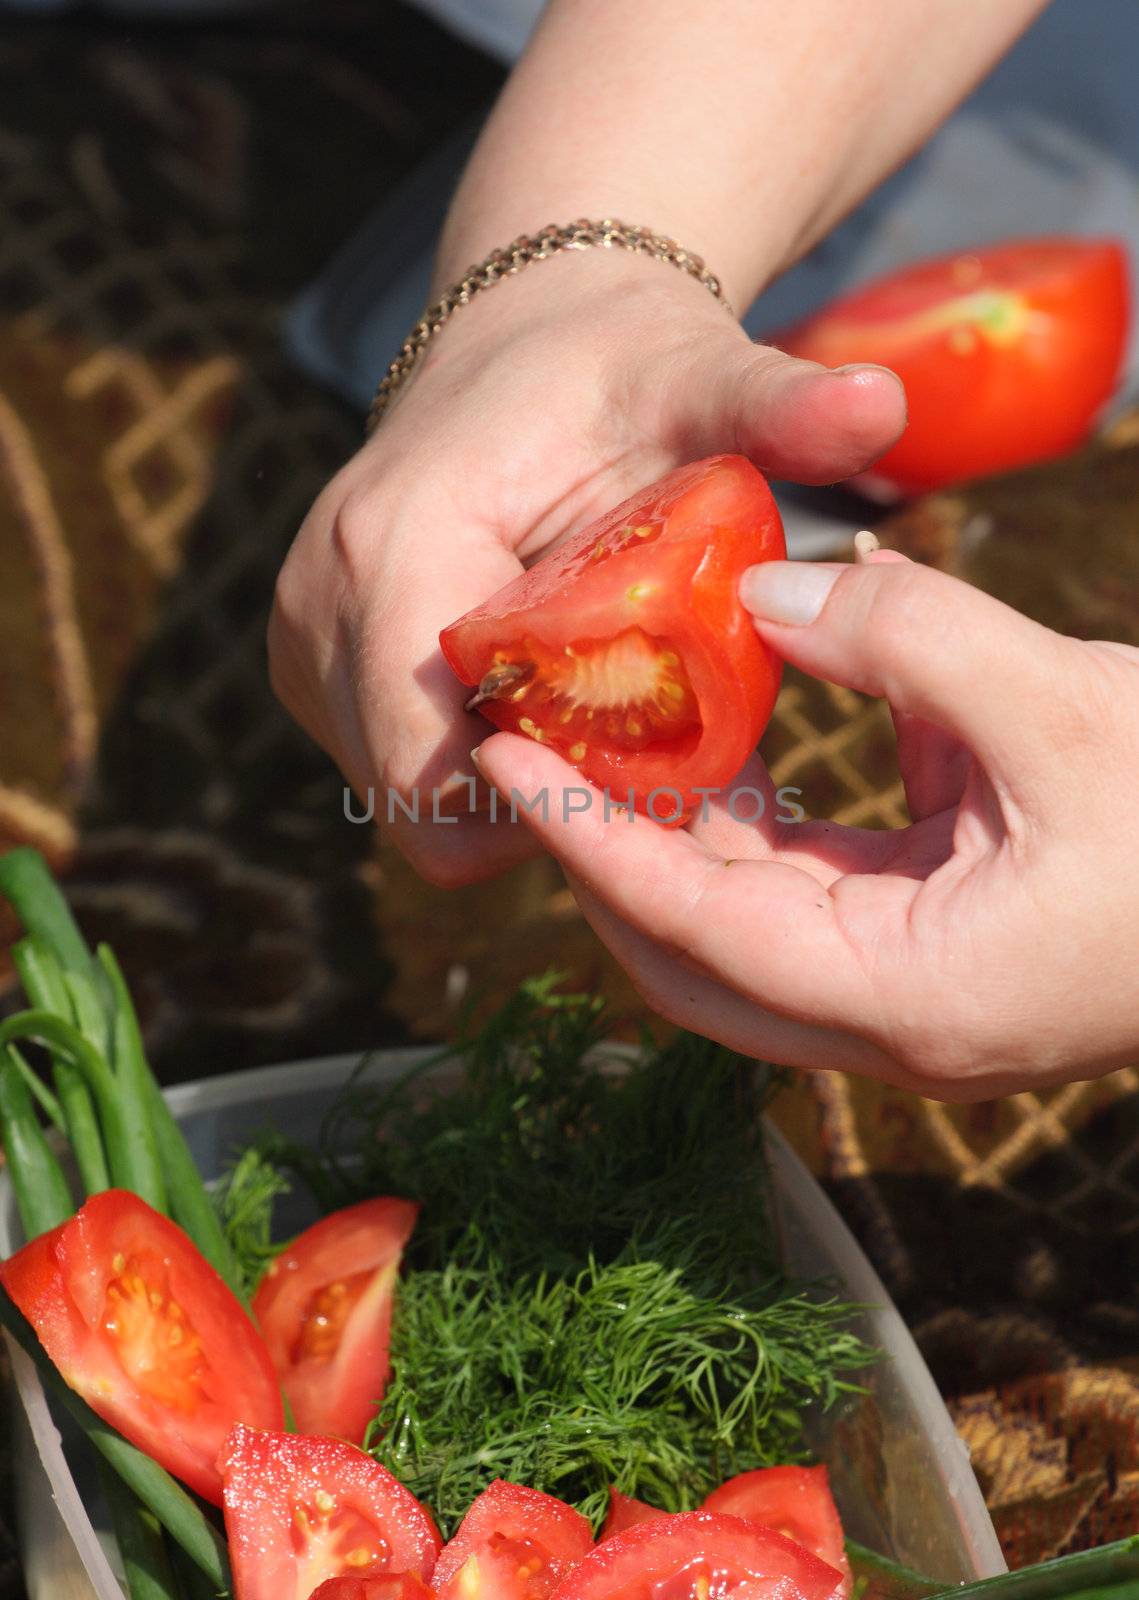 Hands of the girl cut a tomato by fedlog